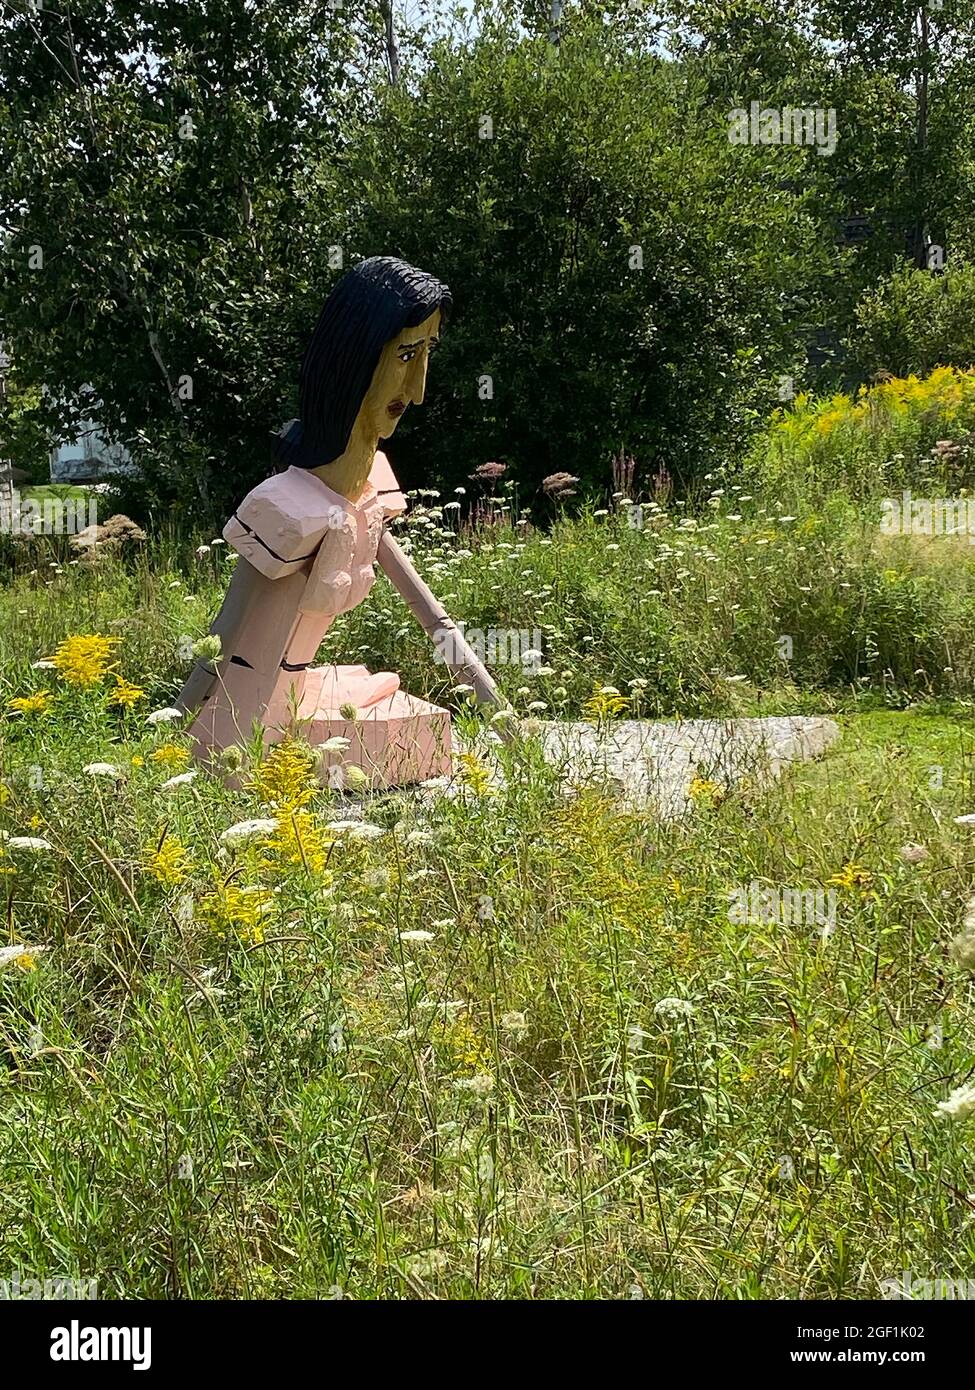 This sculpture, titled Local Girl, was done by American artist Bernard Langlais and is housed at the Langlais Sculpture Preserve in Cushing, Maine. It is based on Christina Olson, who is is best known as the subject of N C Wyeth’s Christina’s World painting. In the background is a cow by Langlais.  Bernard Langlais (1921 - 1977) was a Maine native and maintained a studio in Cushing, Maine until his death at the age of 56. He developed his artistic interest at the Corcoran School of Art in Washington DC and the Skowhegan School of Painting and Sculpture. Stock Photo